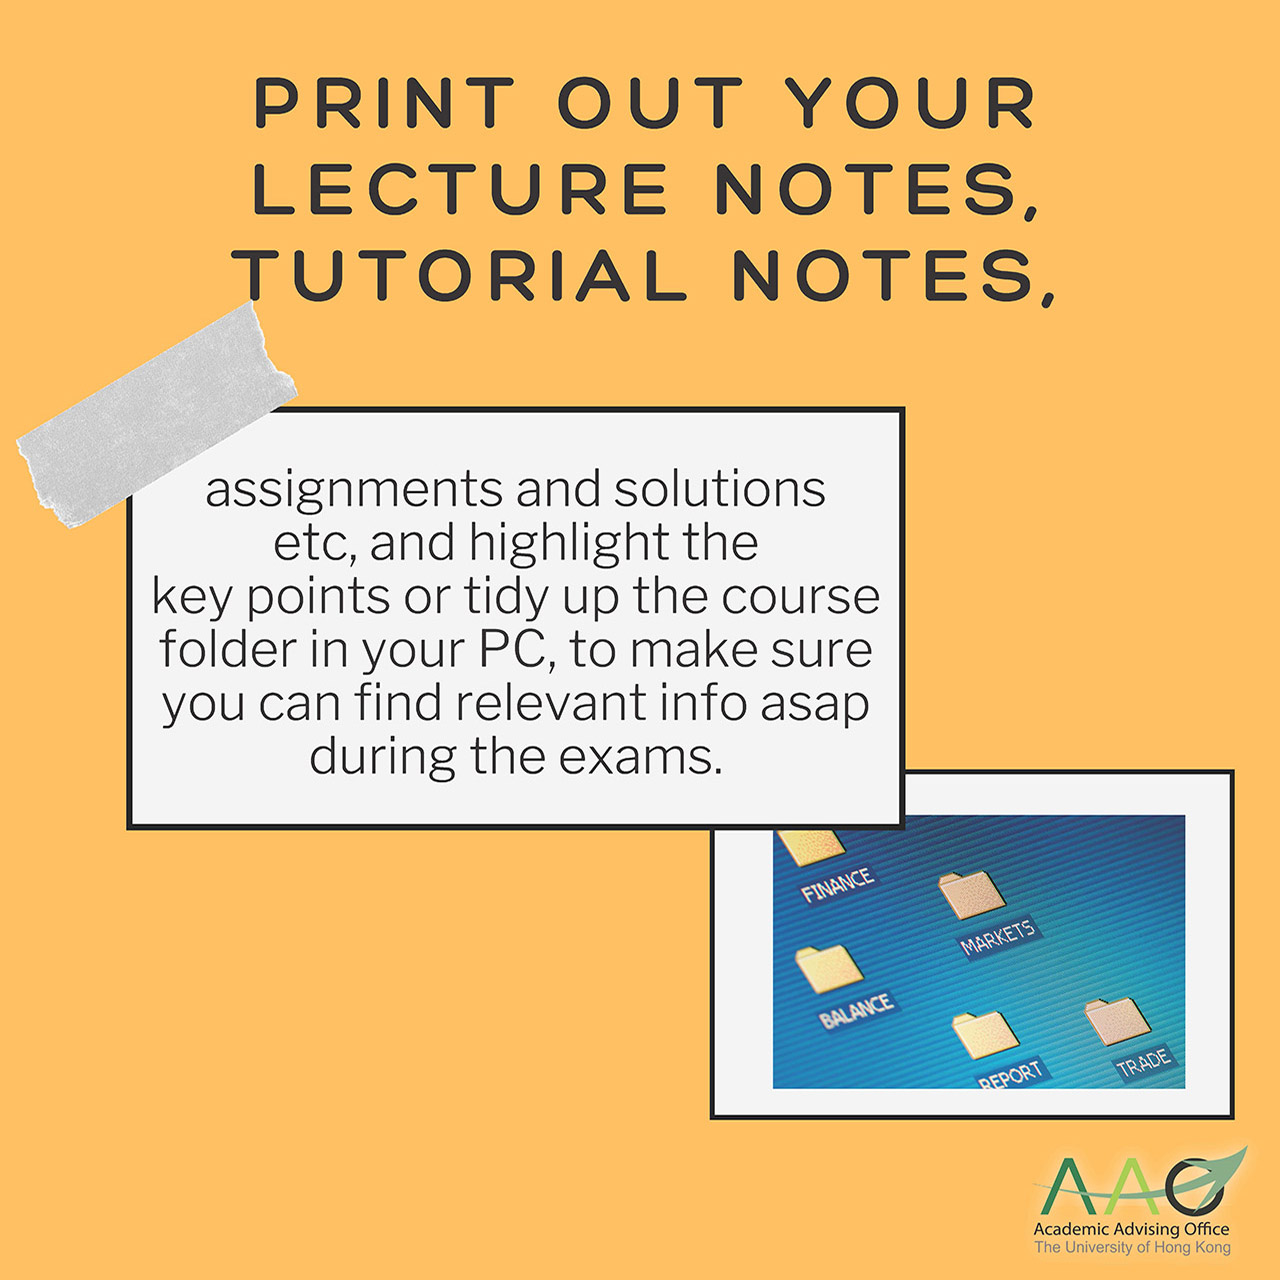 Print out your lecture notes, tutorial notes, assignments and solutions etc, and highlight the key points or tidy up the course folder in your PC, to make sure you can find relevant info asap during the exams.